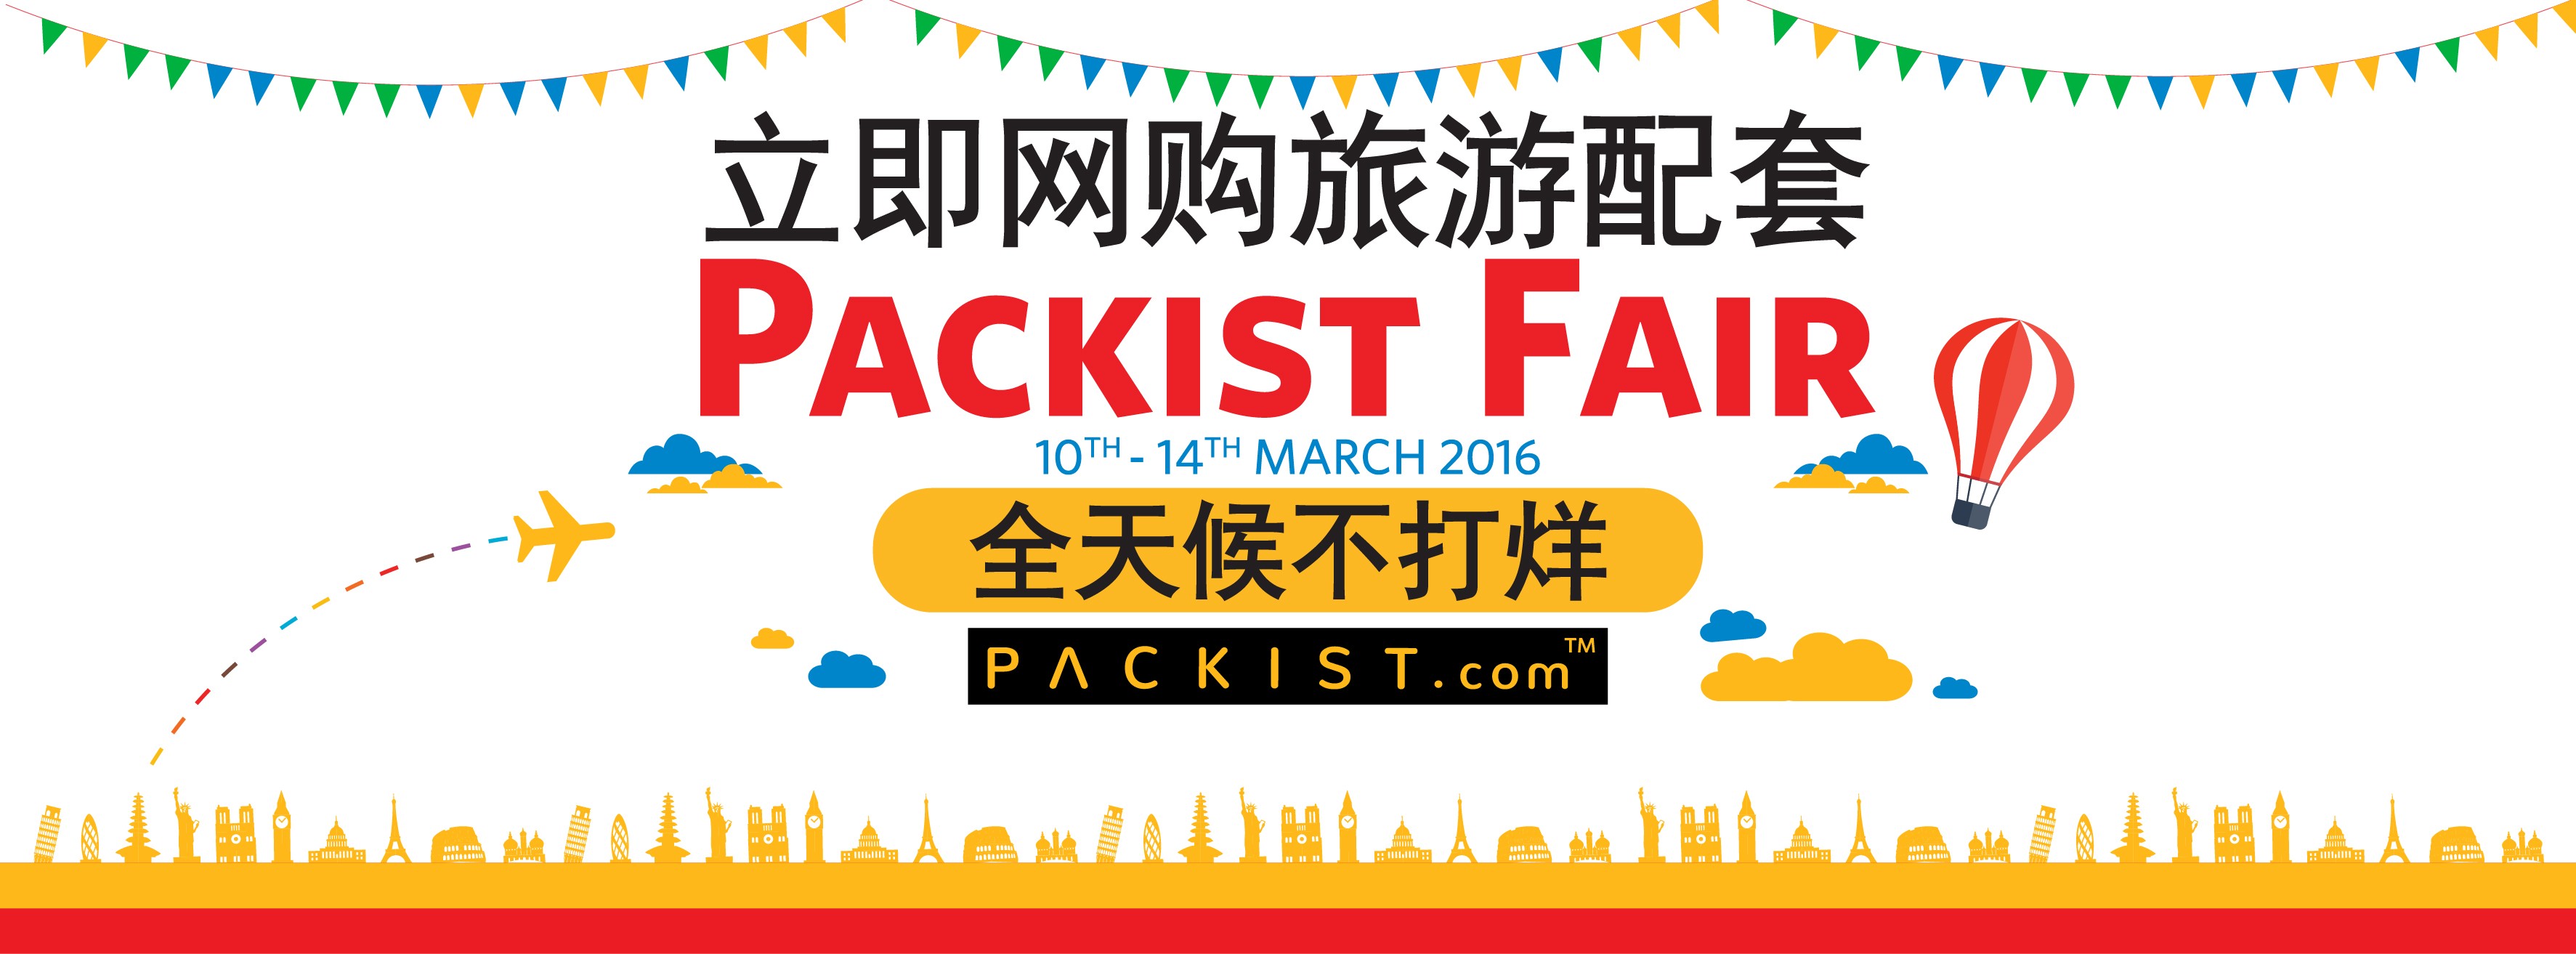 packist-fair-chinese-ver-cover-photo_1